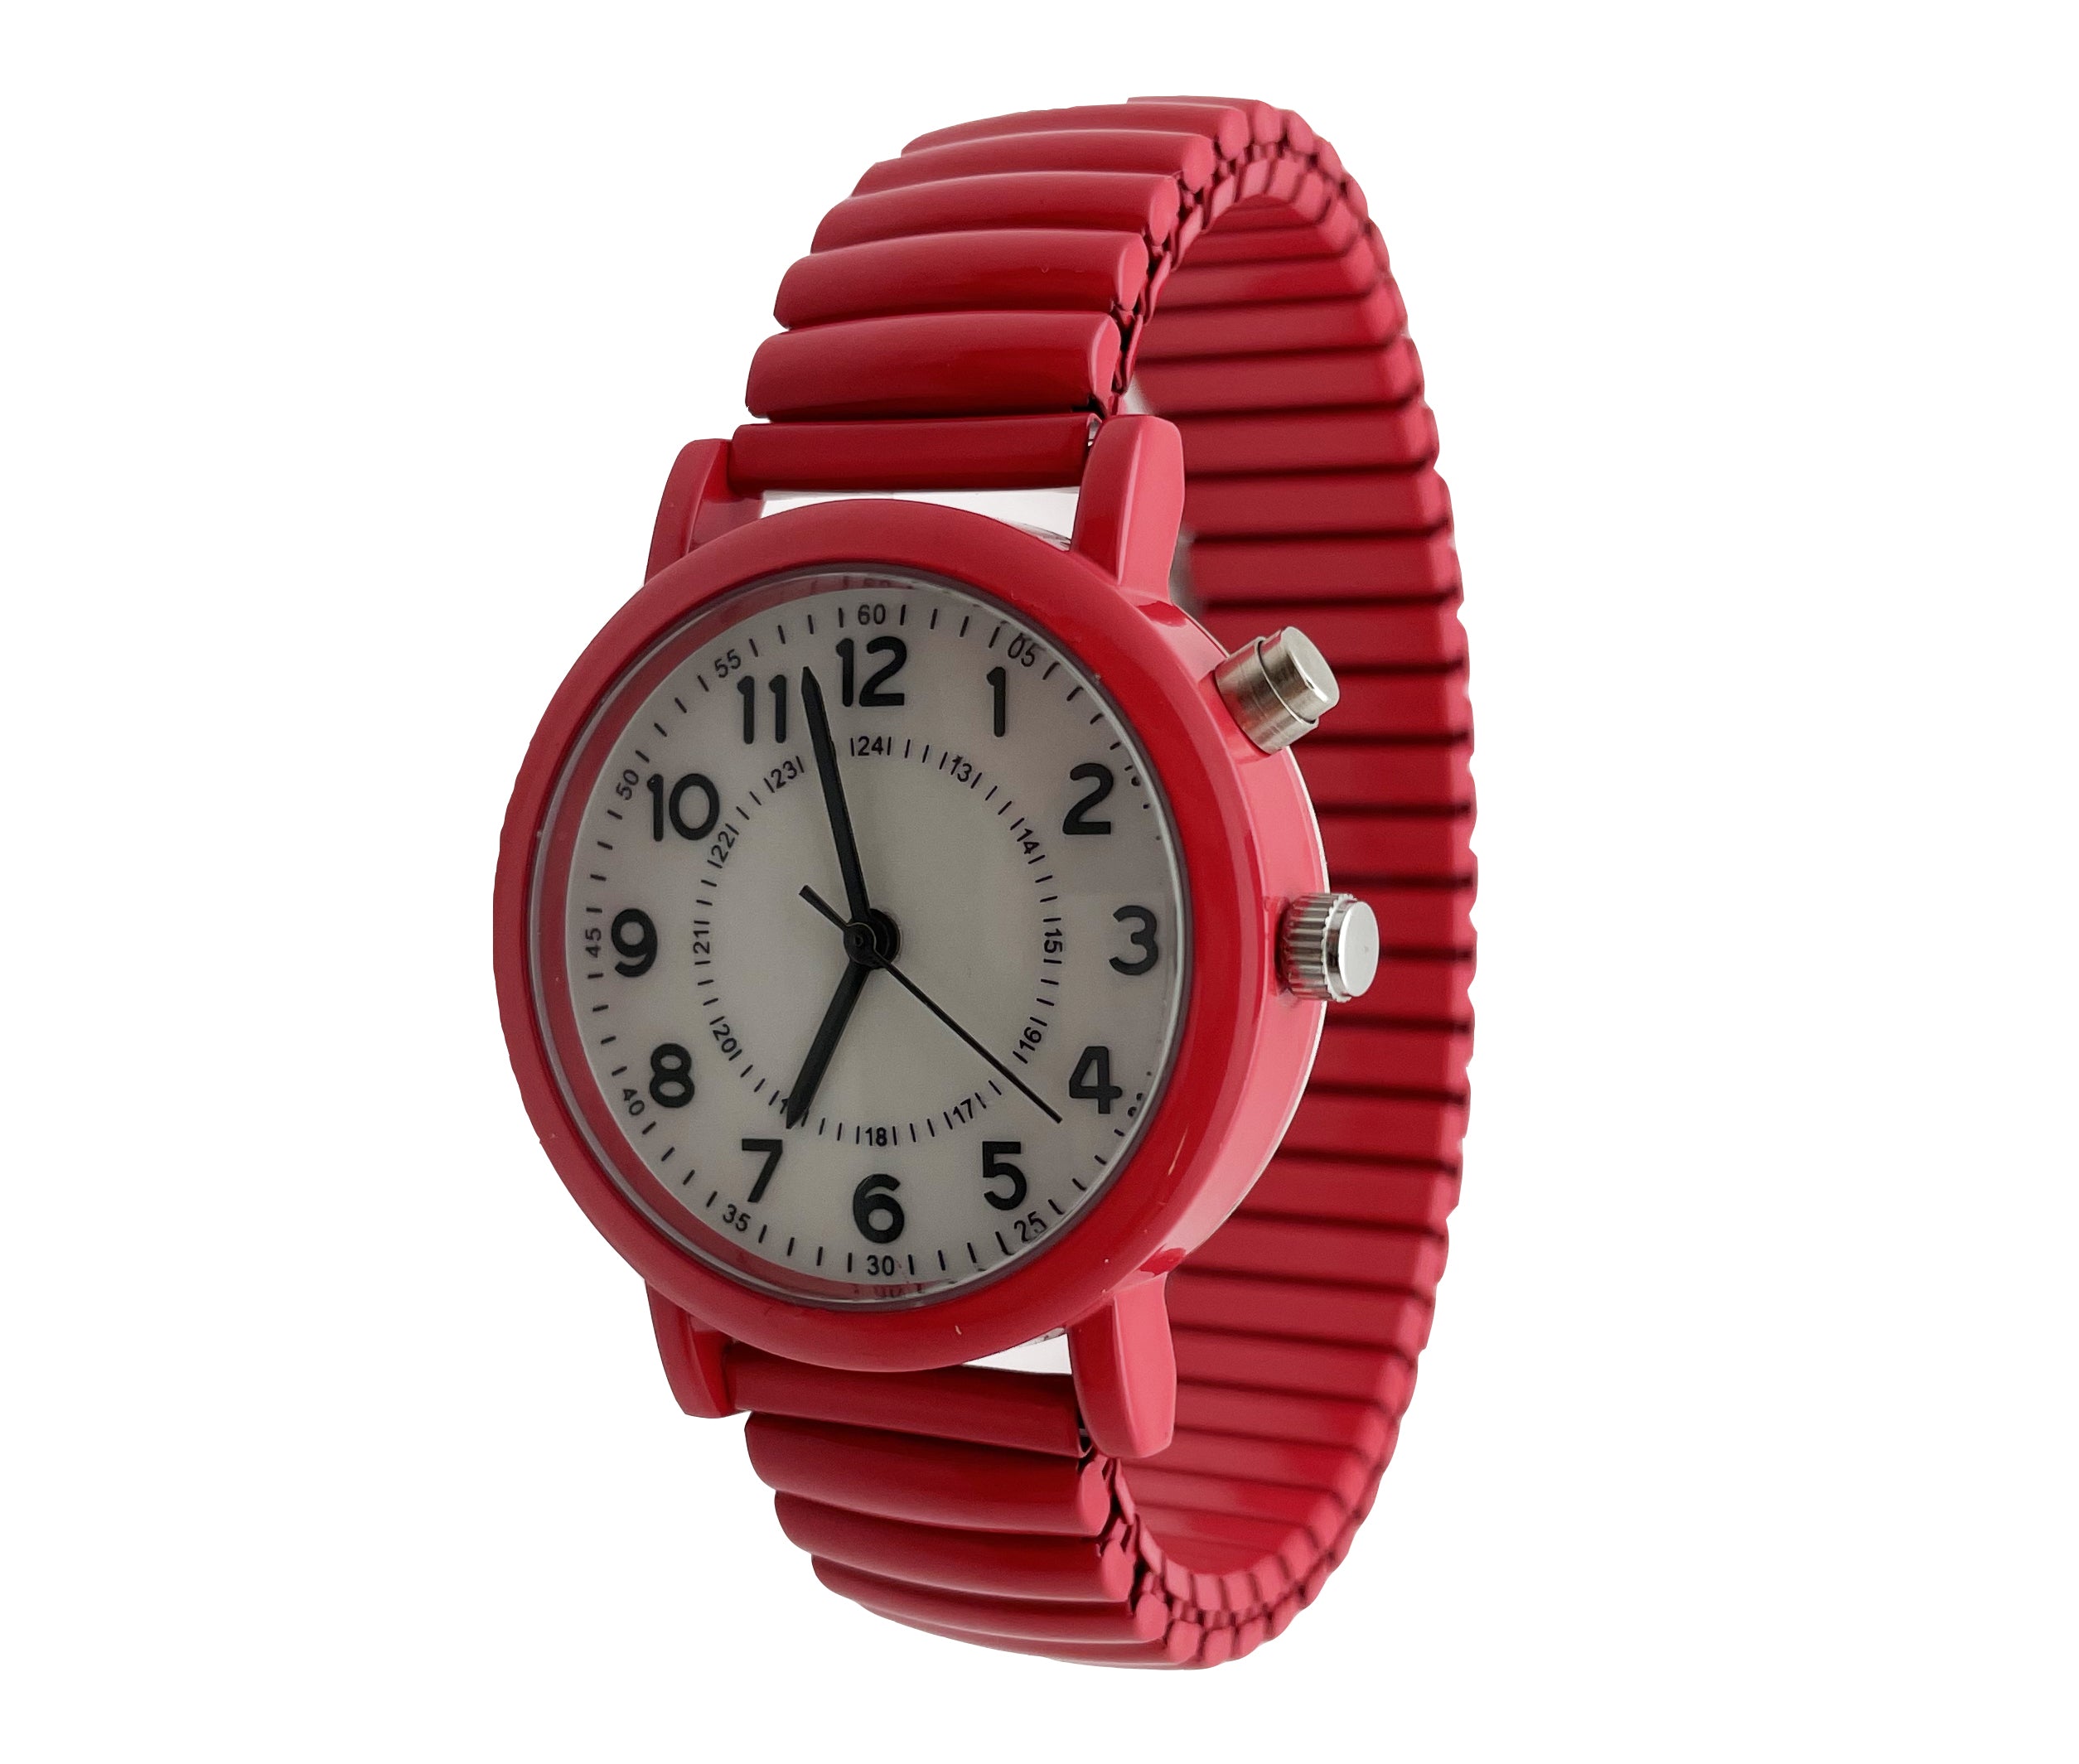 6 Colorful Stretch Bands Watches